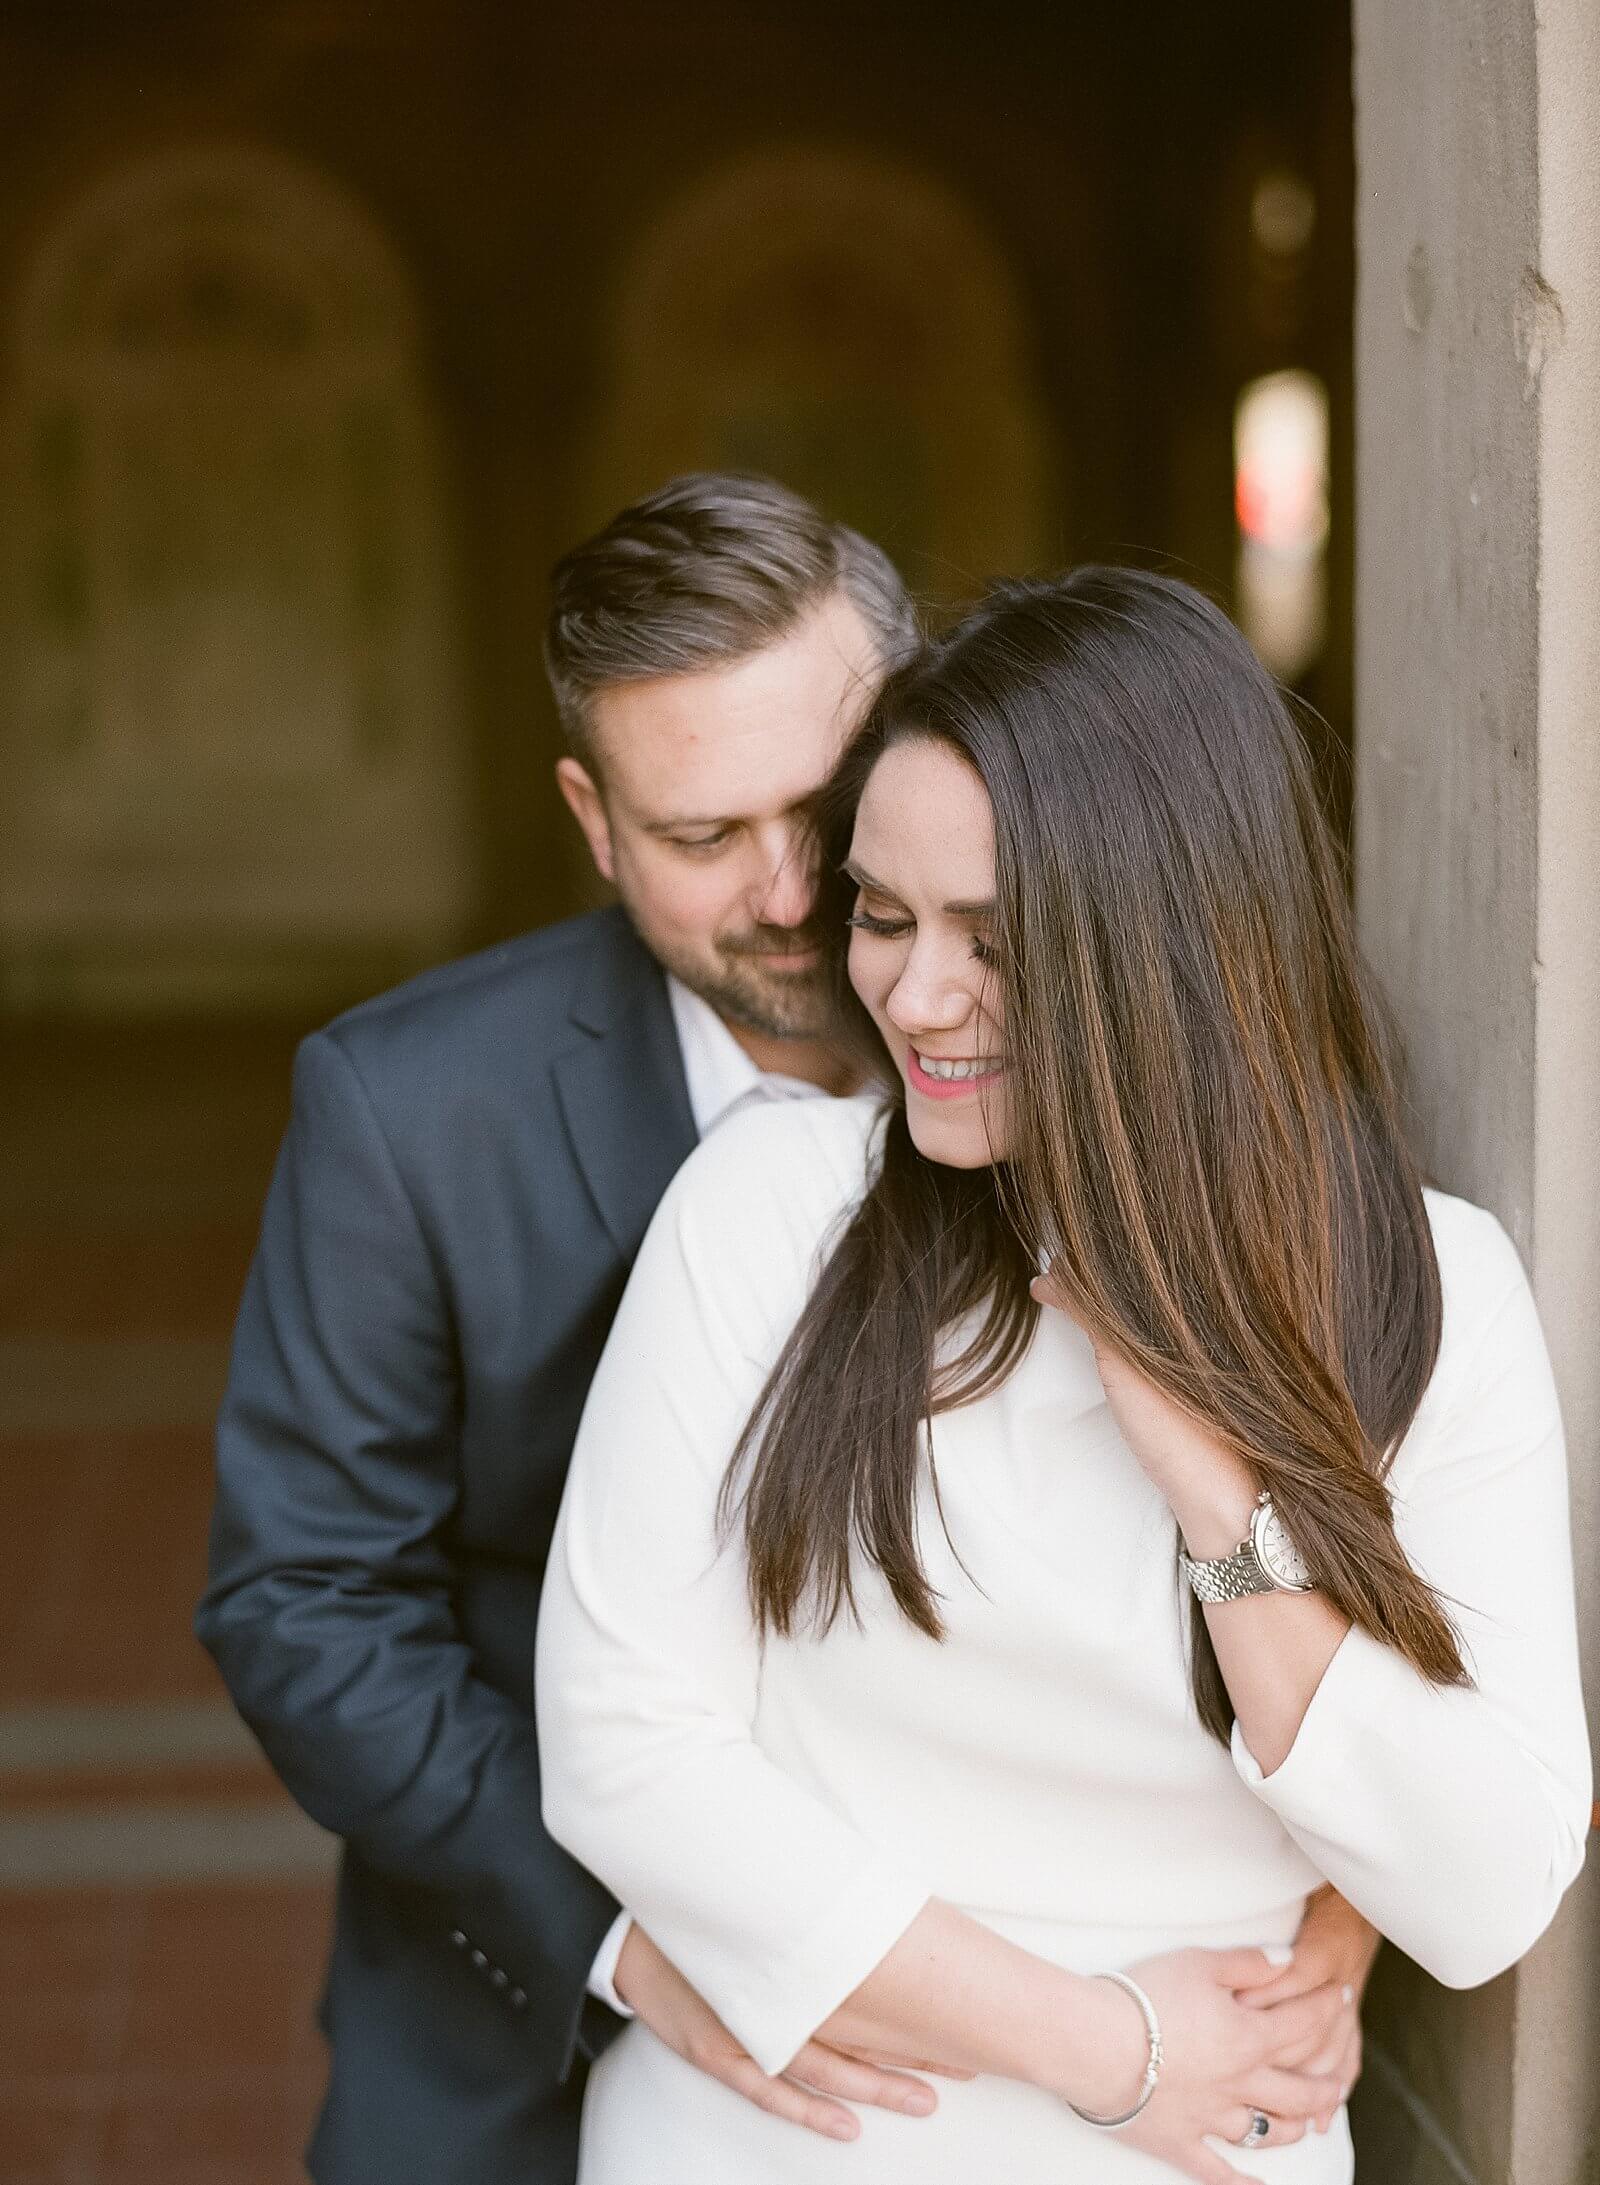 A couple during their engagement session at Bethesda Terrace in Central Park.